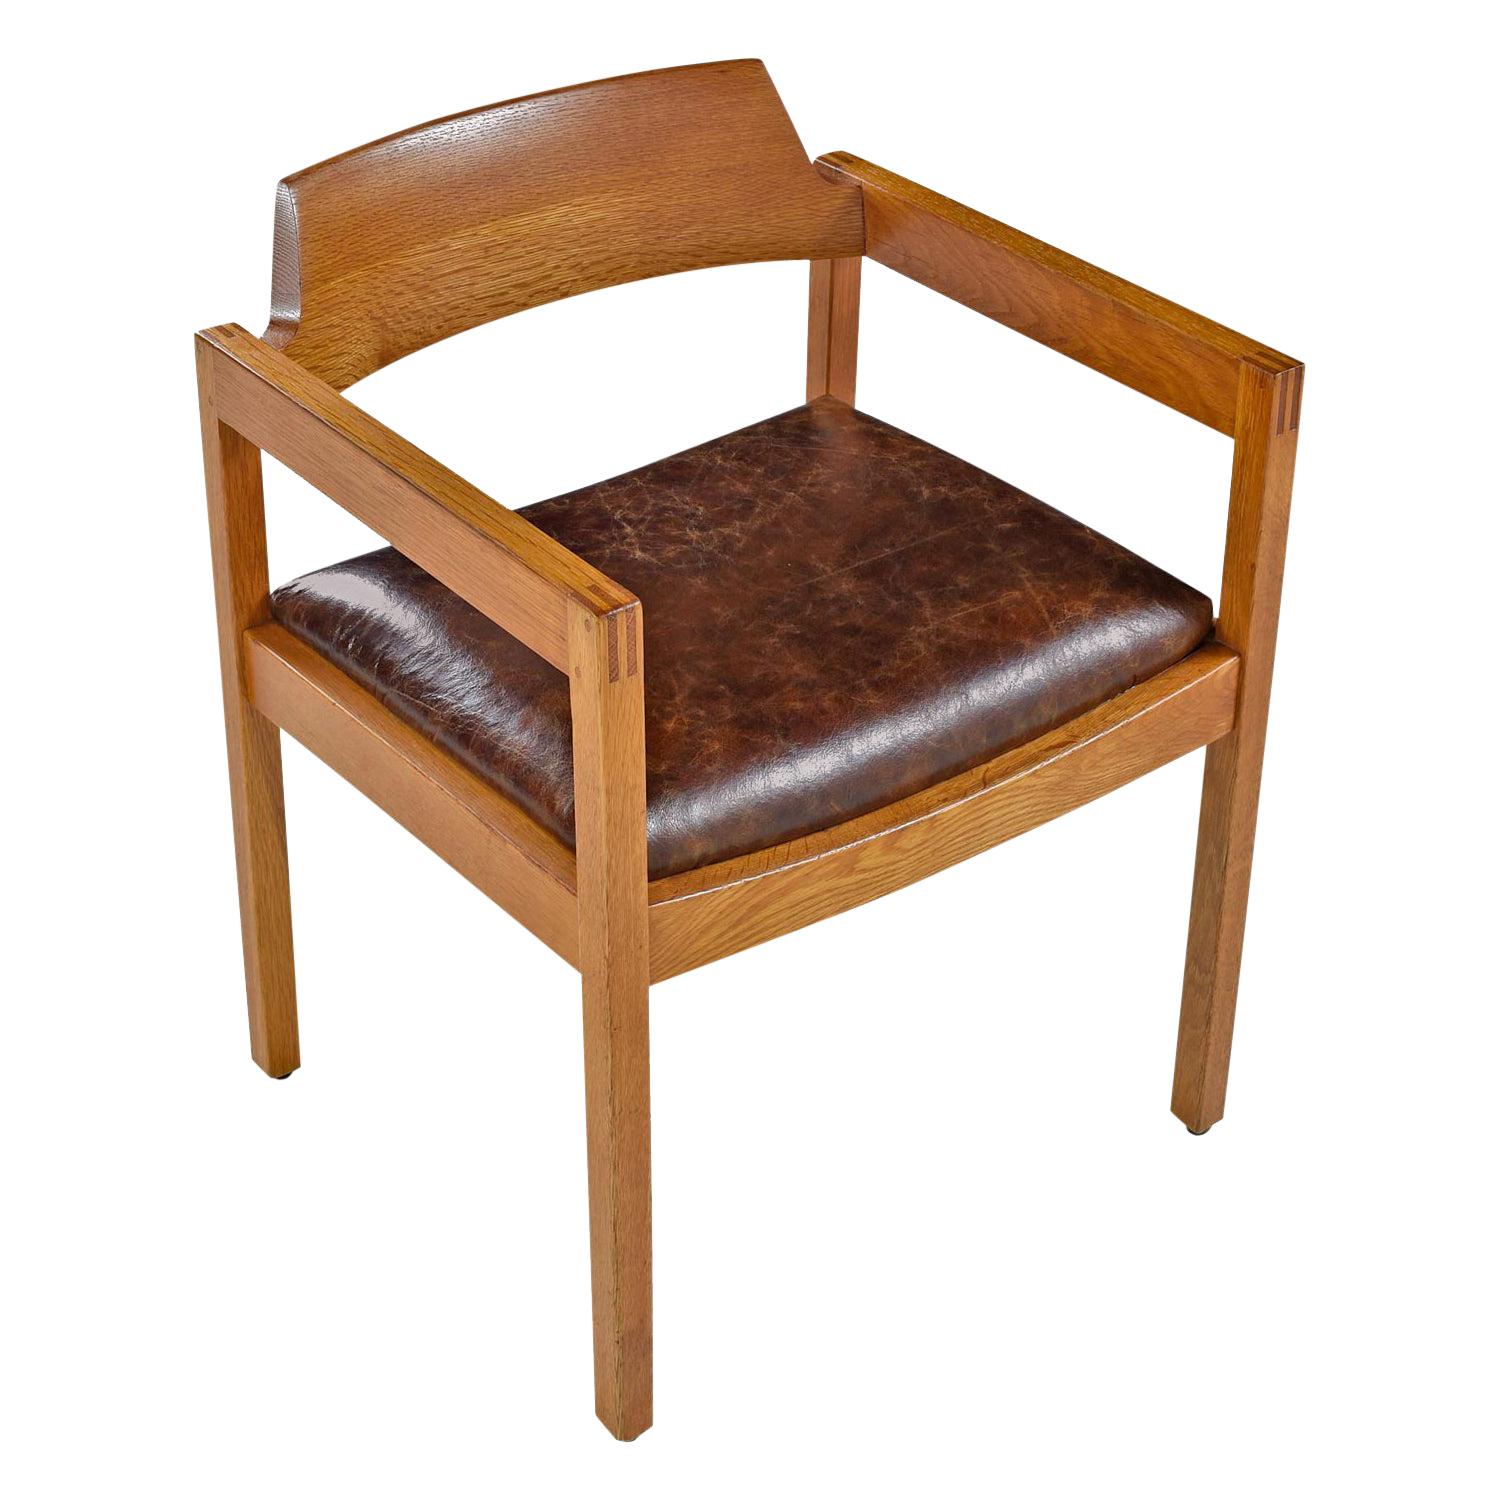 Solid oak frame has been restored by our in-house cabinet shop and re-upholstered in leather. Use the chair at the dining table, as a desk chair in the office or armchair in your living room arrangement. Stamped Gunlocke by the manufacturer.